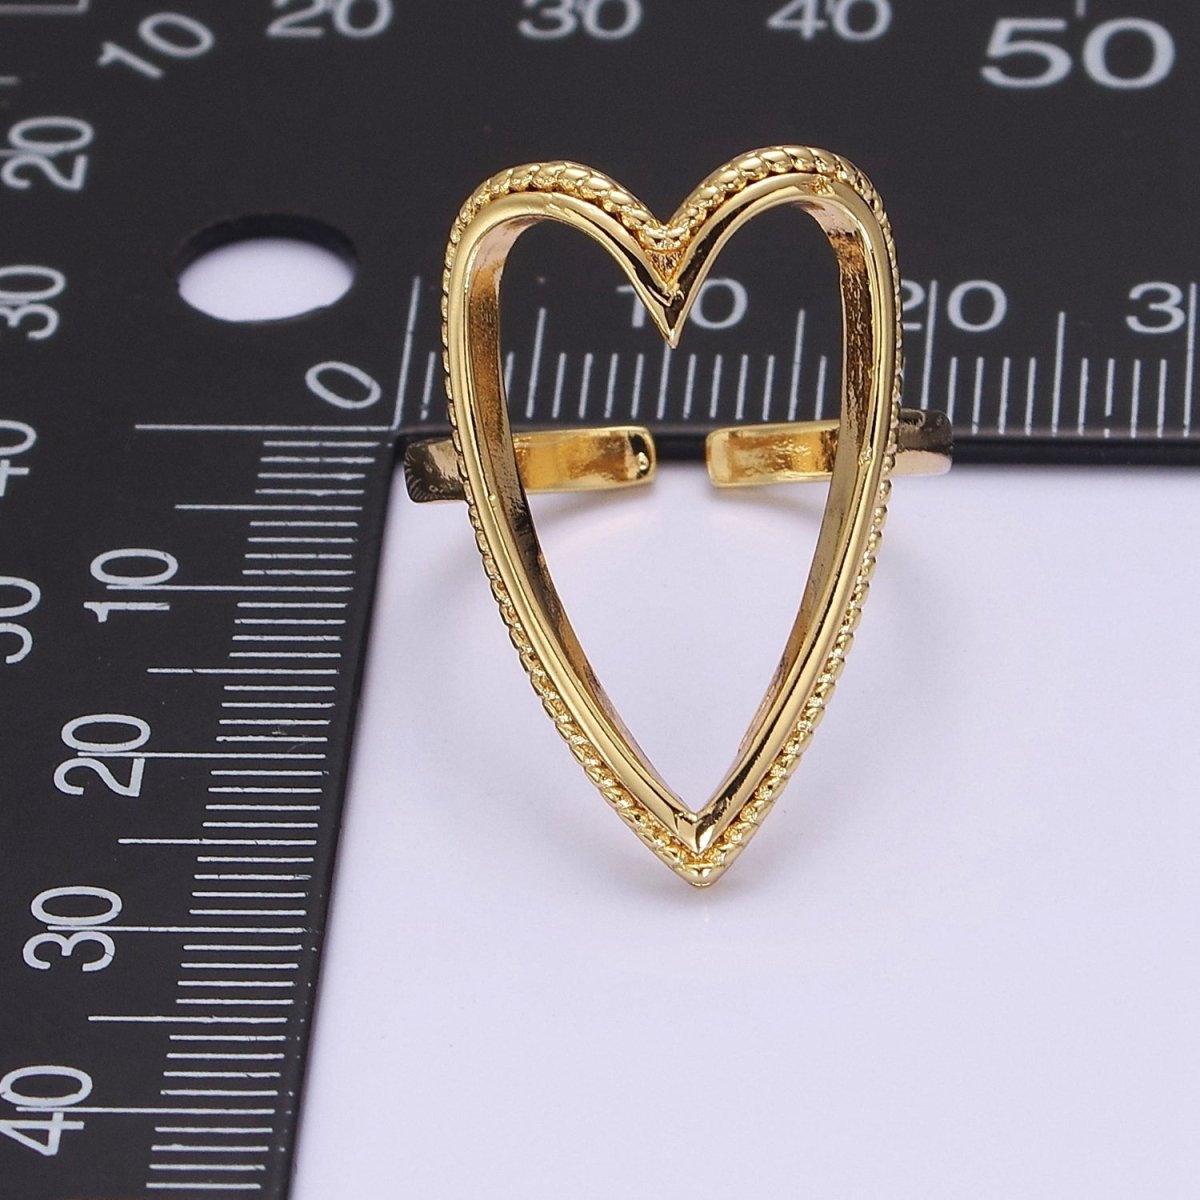 OS Open Heart Ring, Heart Cut Out Ring, Everyday Ring 18K Gold Filled Ring, Fun Unique Cute Ring For Women O-2081 - DLUXCA